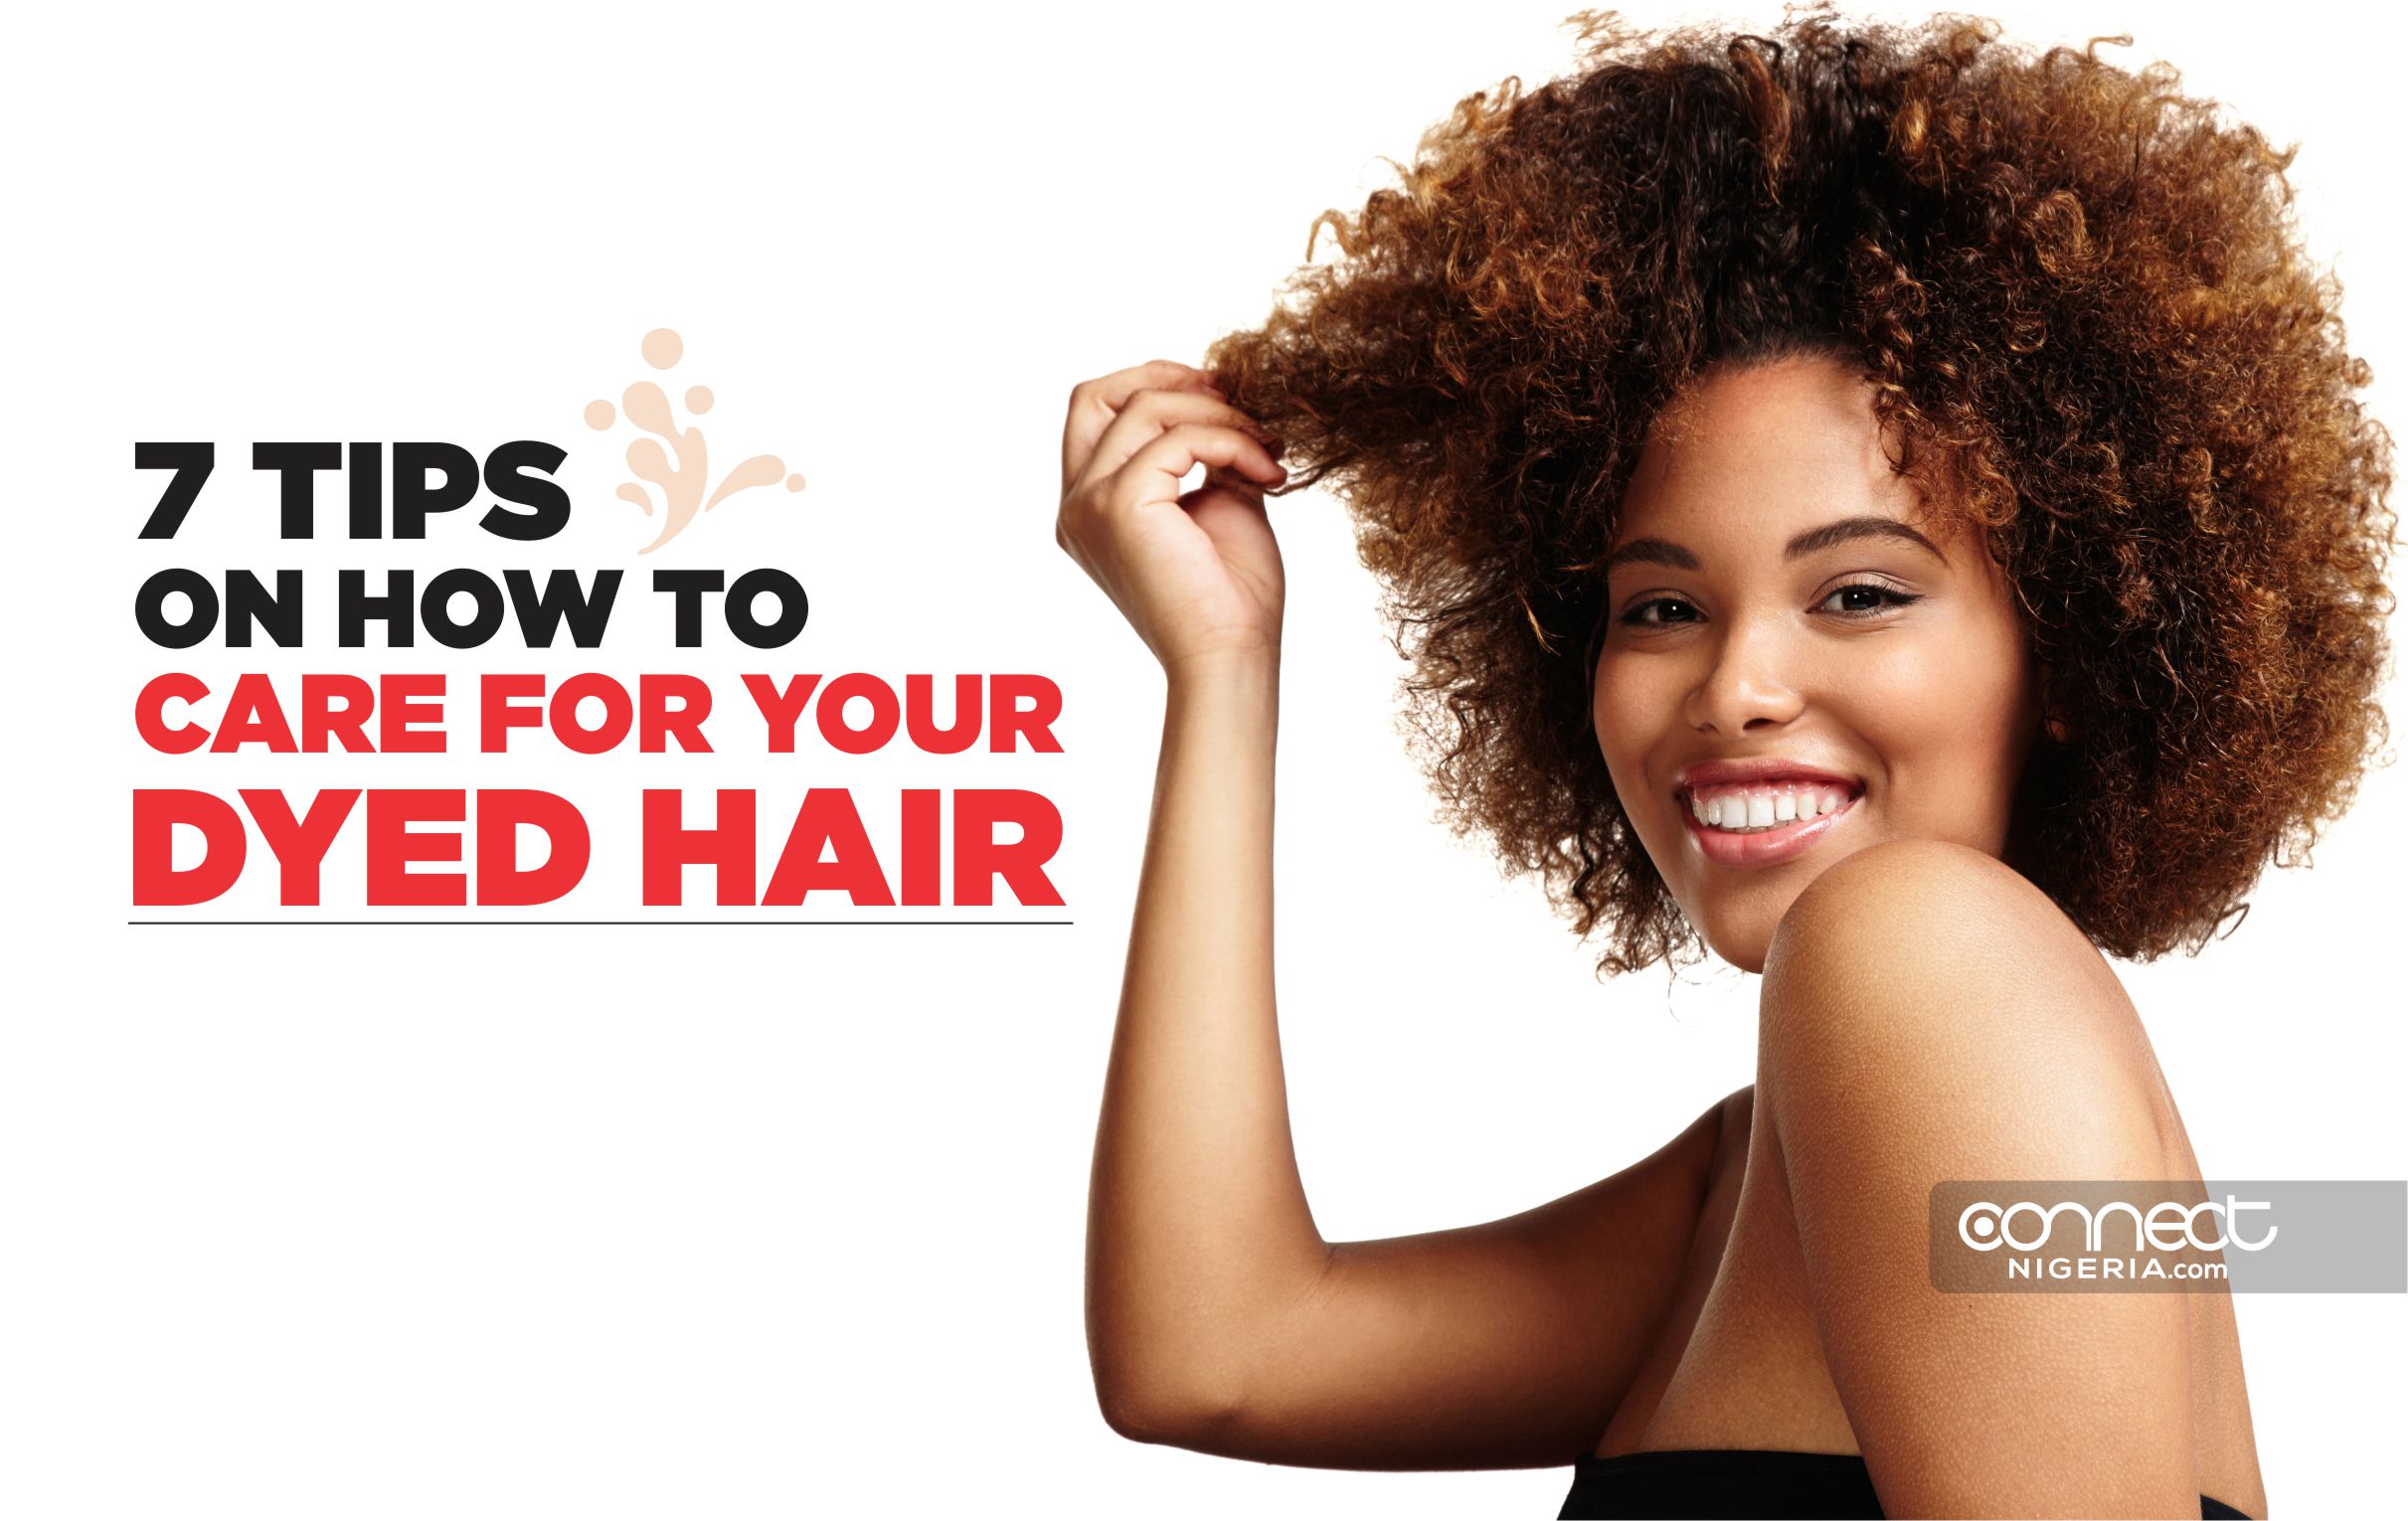 7 Tips On How To Care for Your Dyed Hair